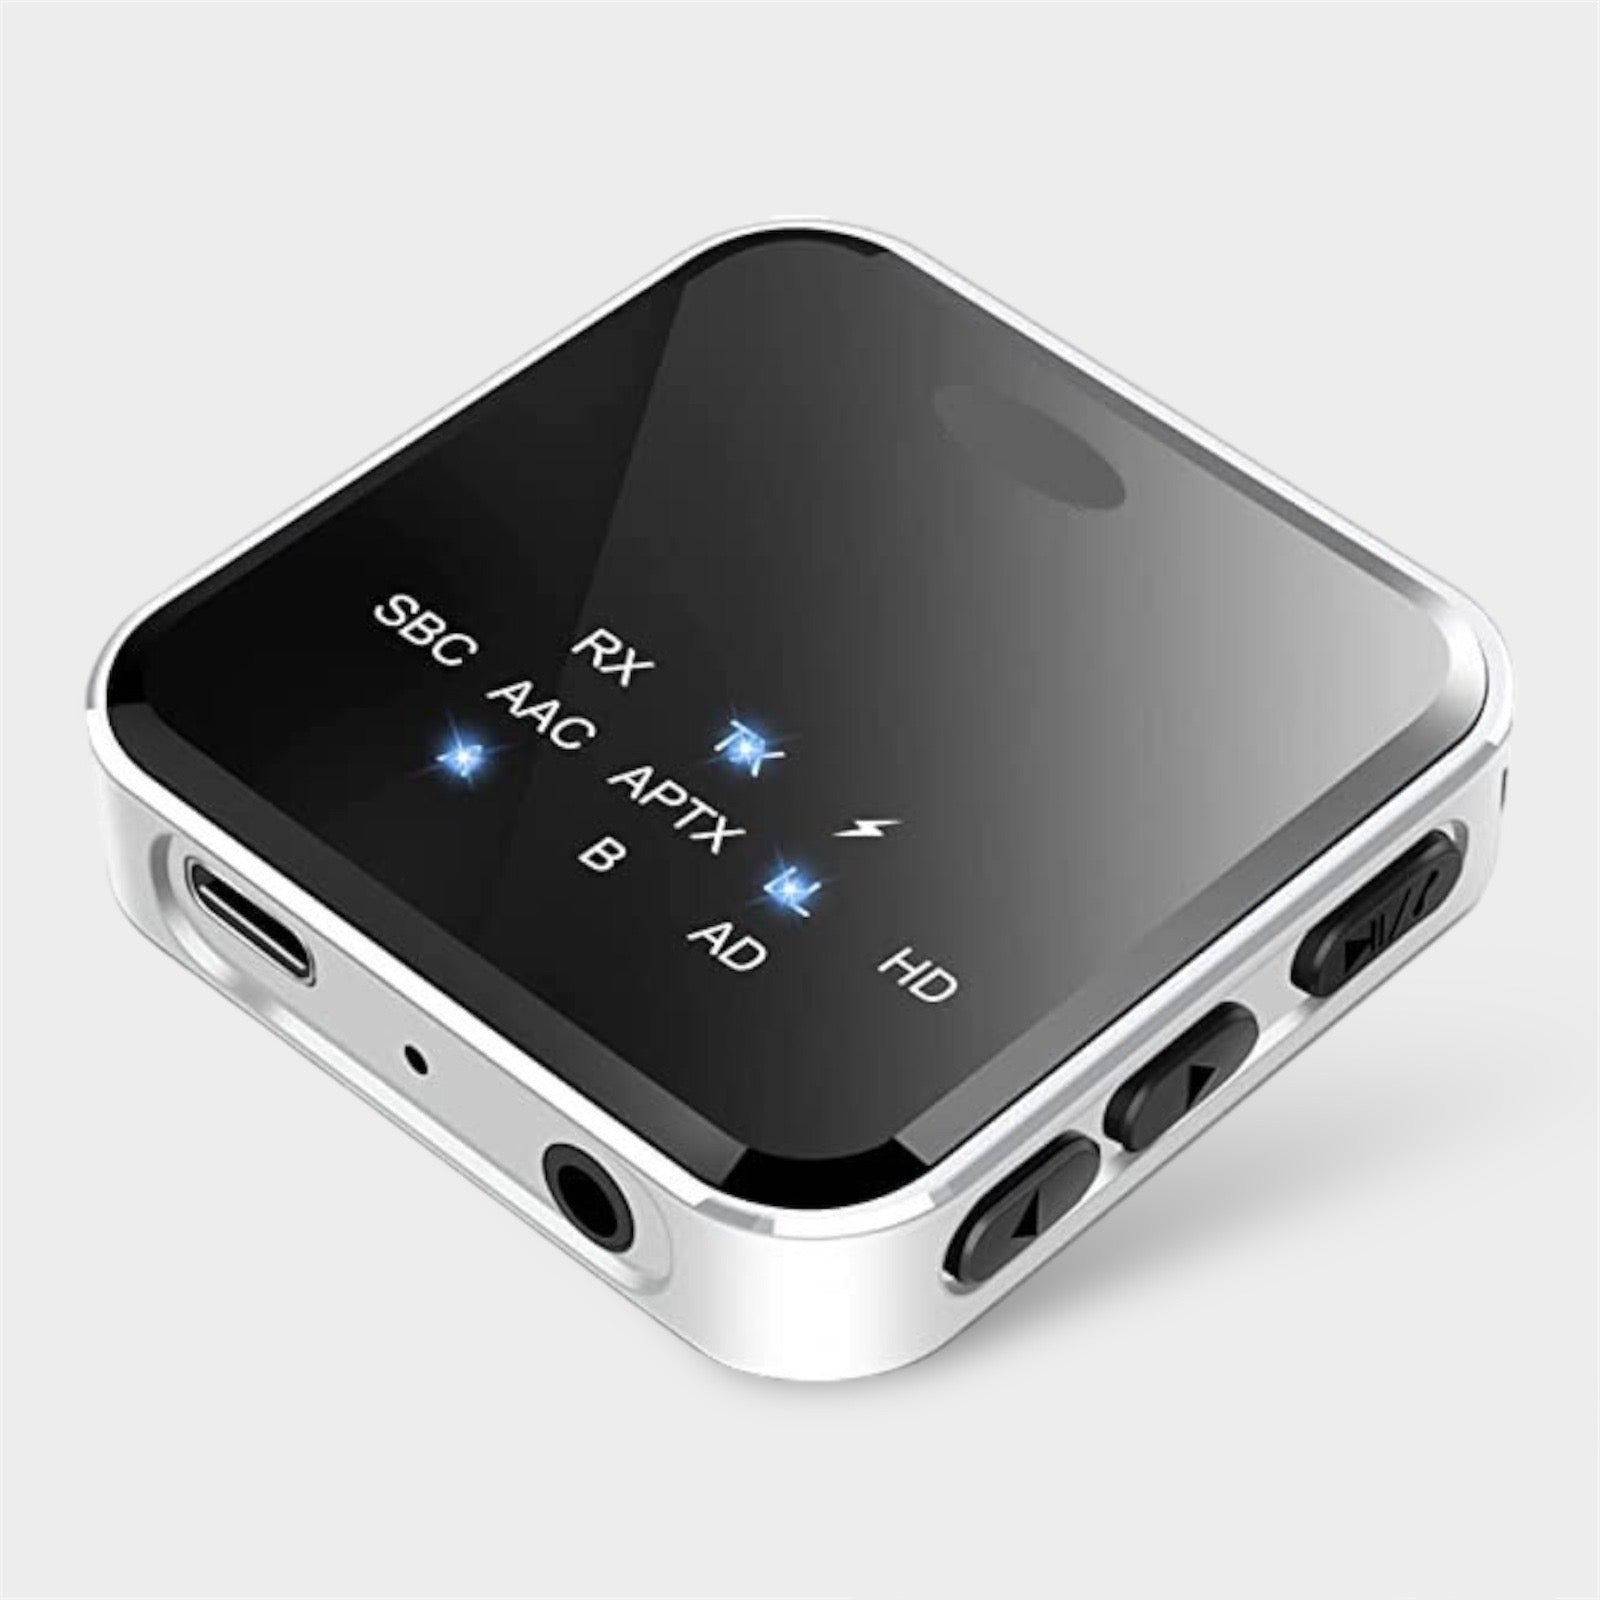 Buy The Dynamix BLUECAST-2 Bluetooth Transmitter Receiver, 59% OFF